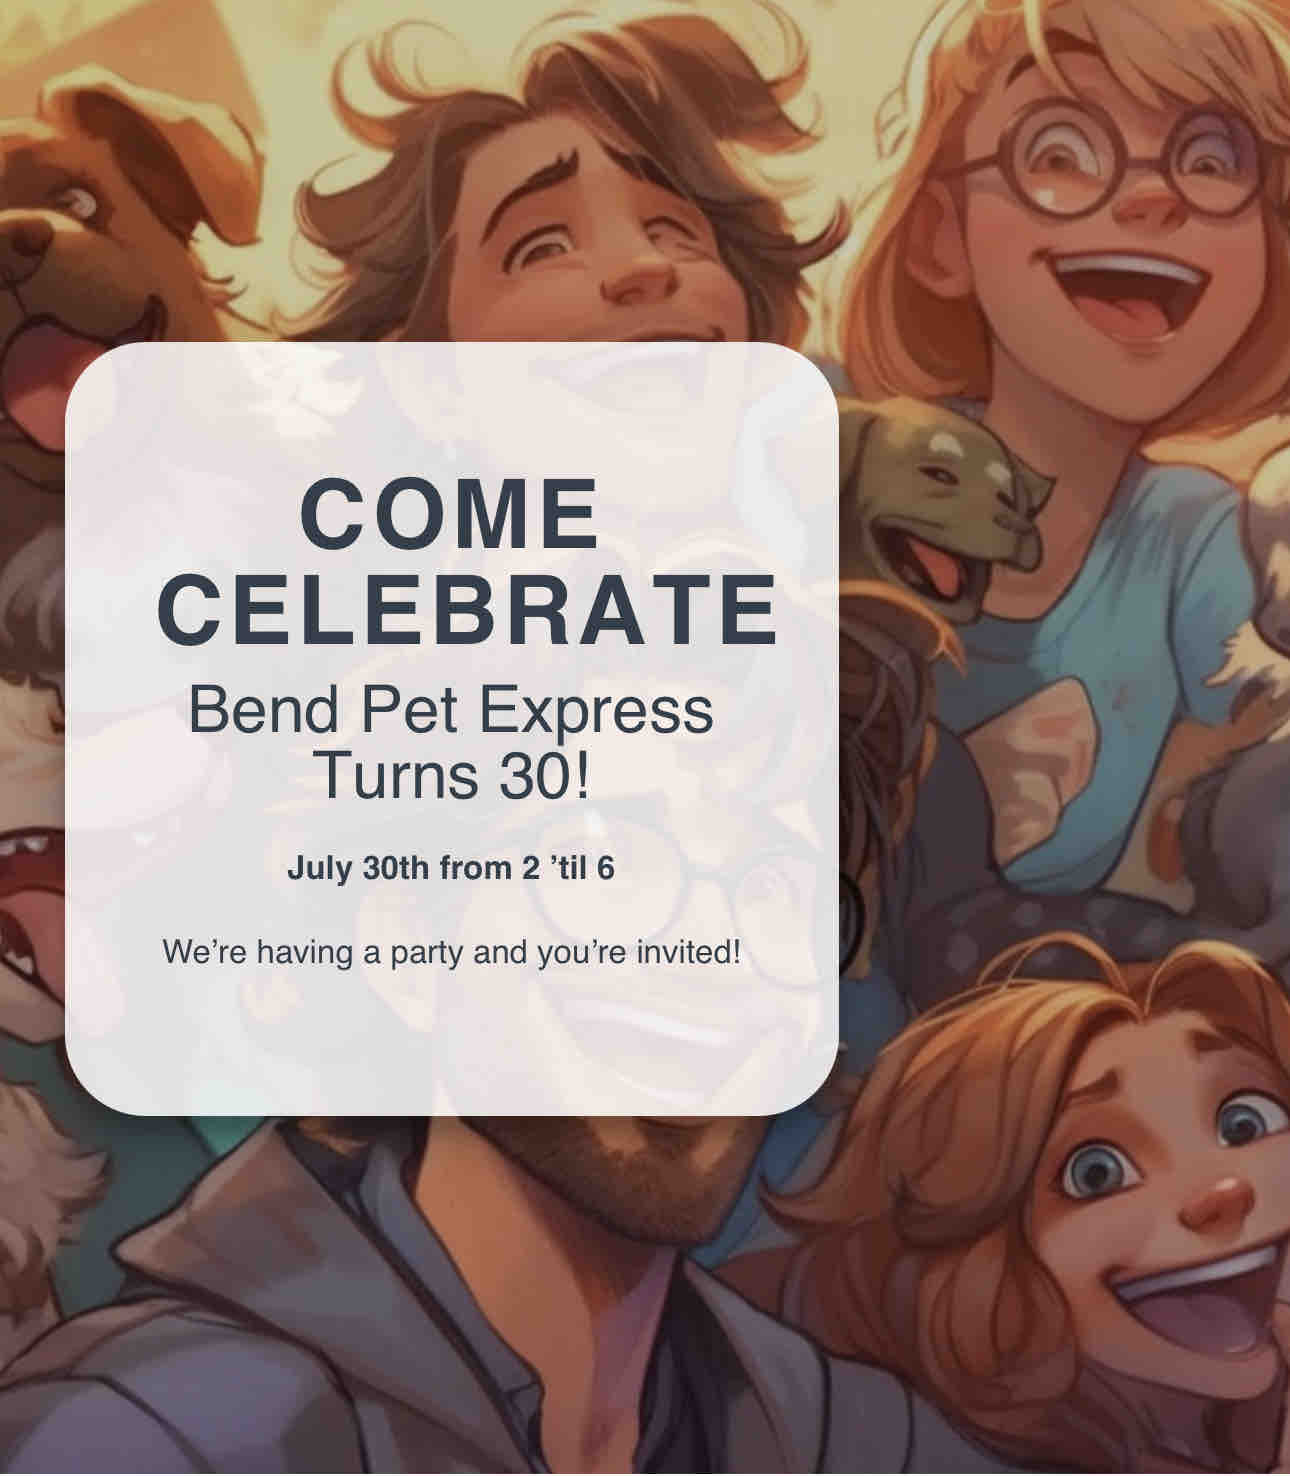 30th Anniversary Party - Bend Pet Express